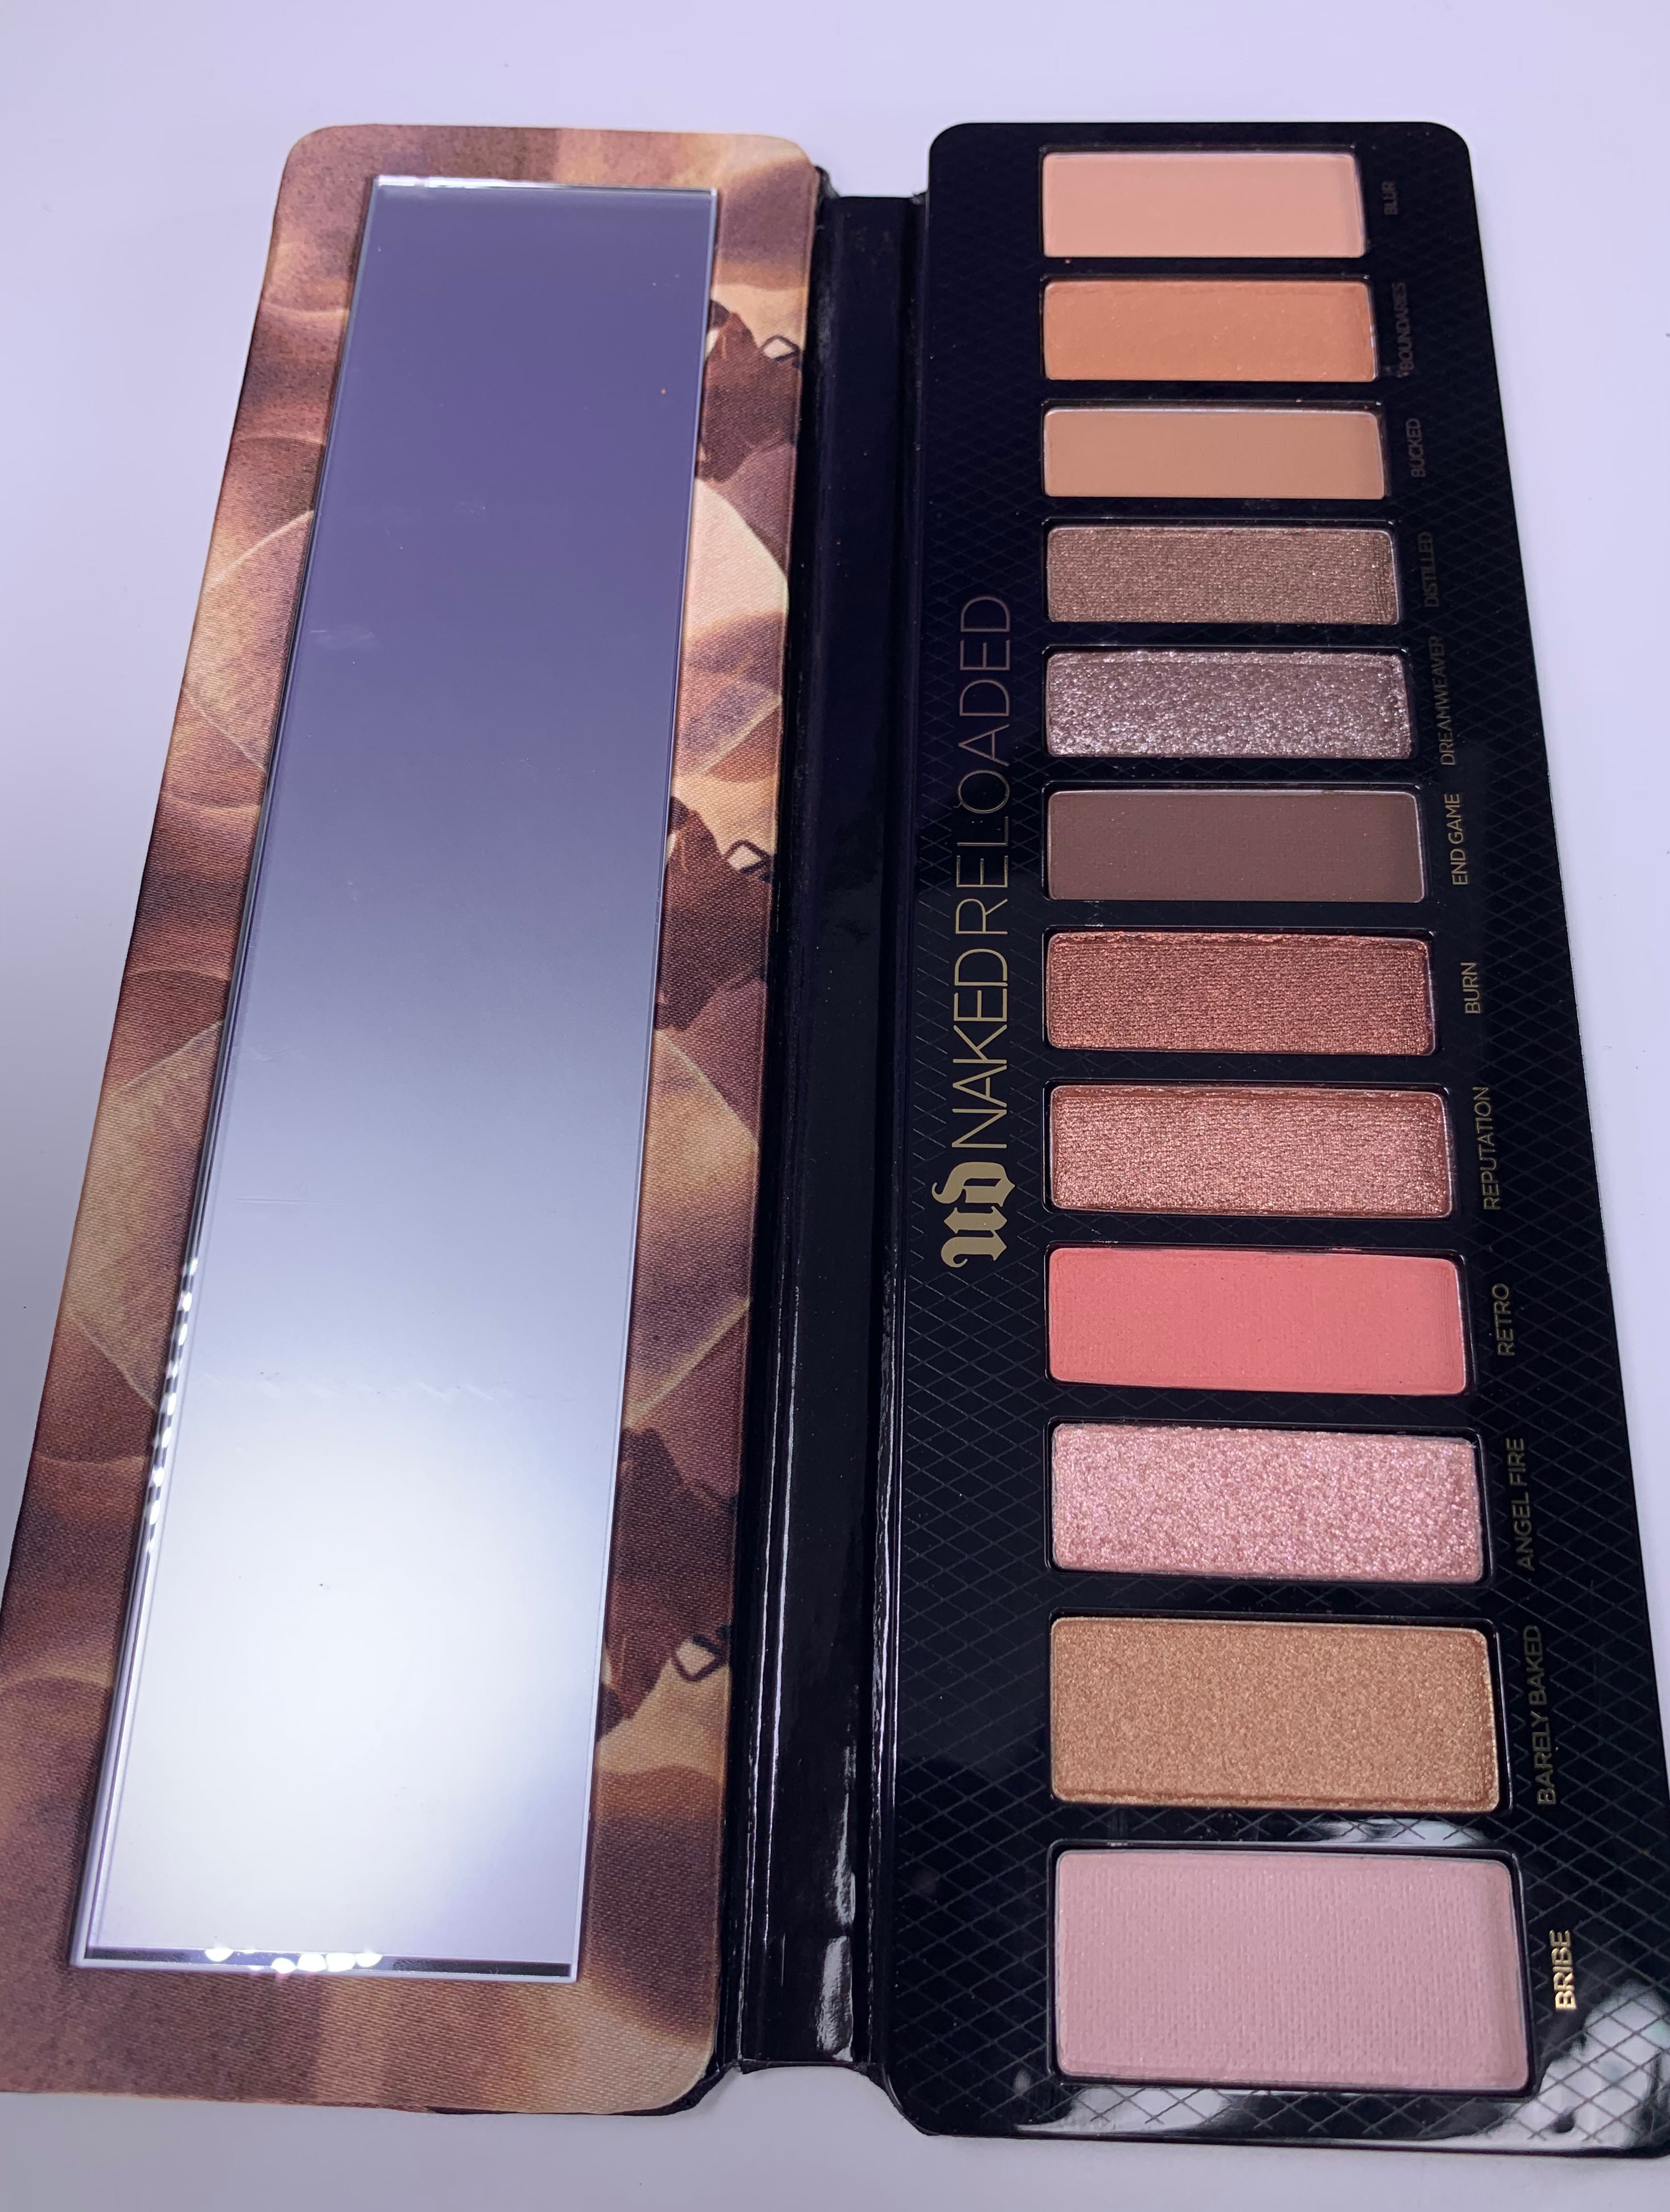 Urban Decay Naked Reloaded Palette Review and Swatches on Fair Skin